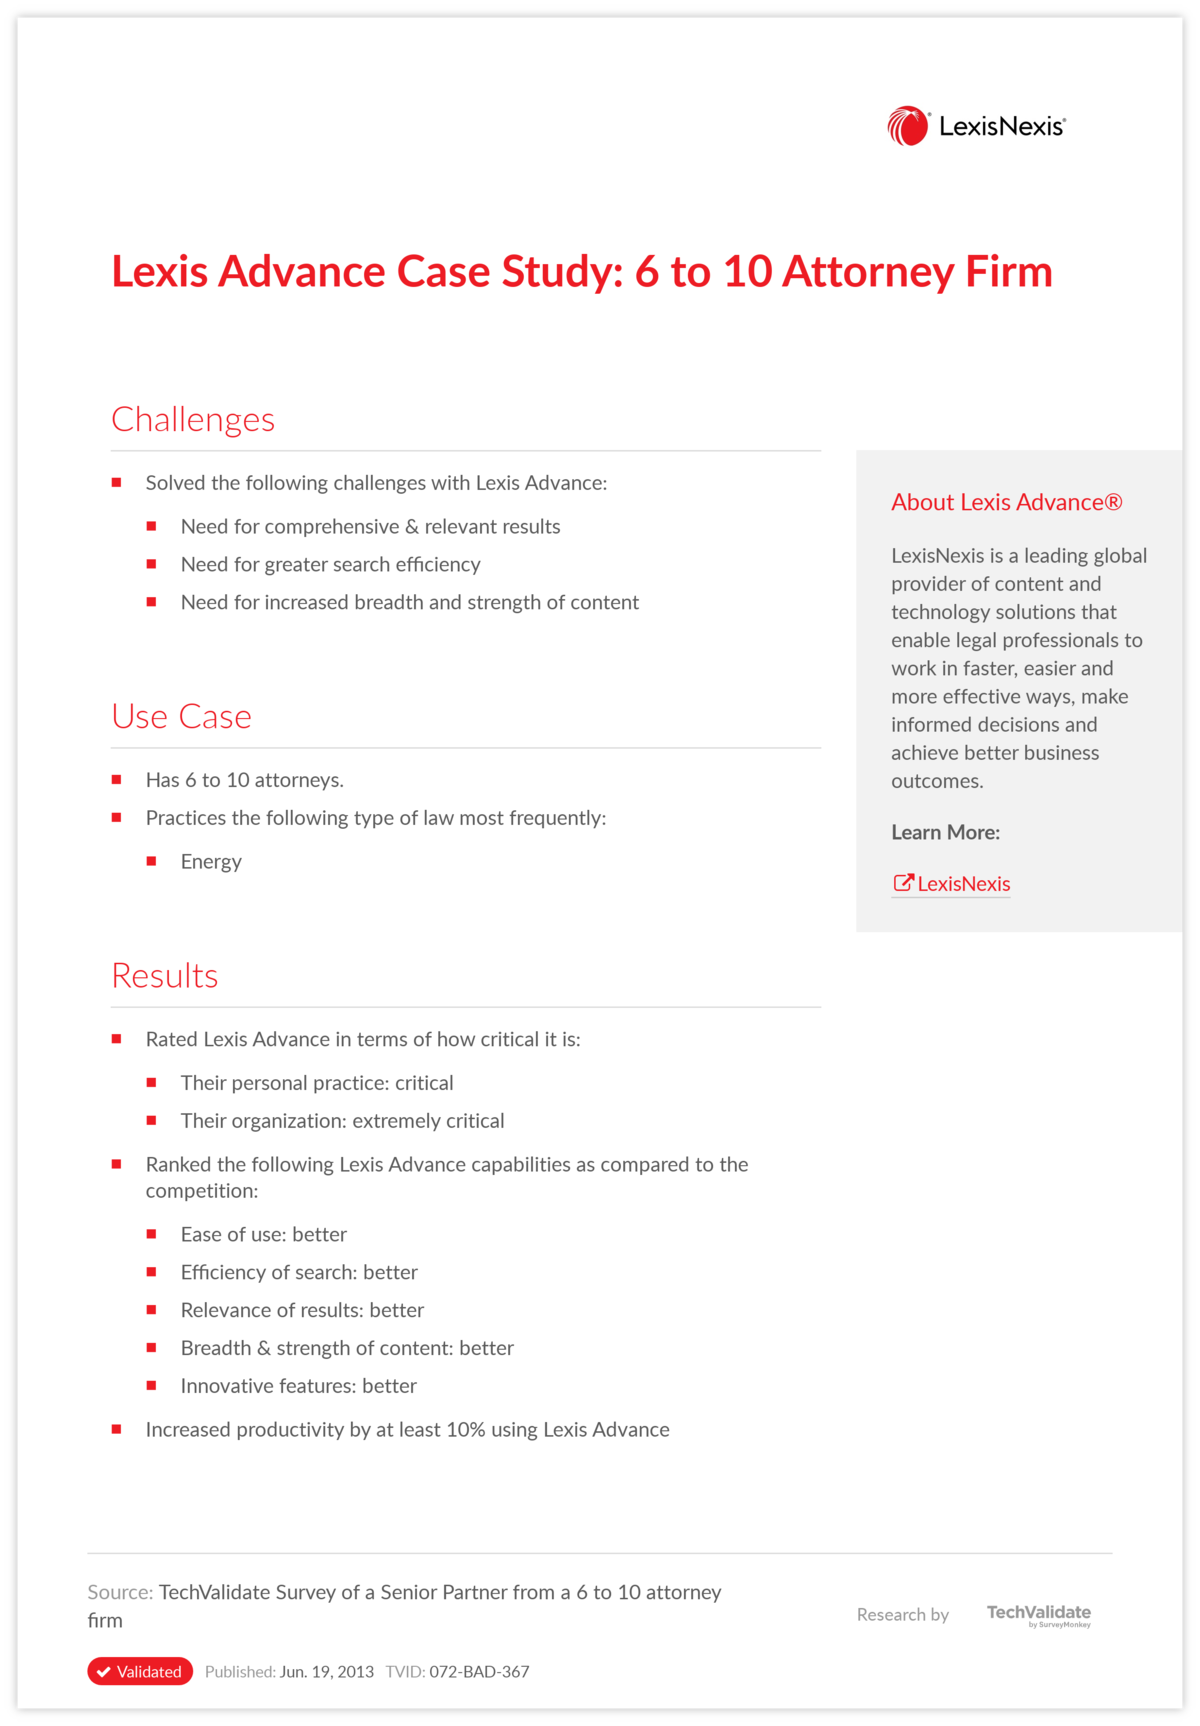 Lexis Advance Case Study: 6 to 10 Attorney Firm